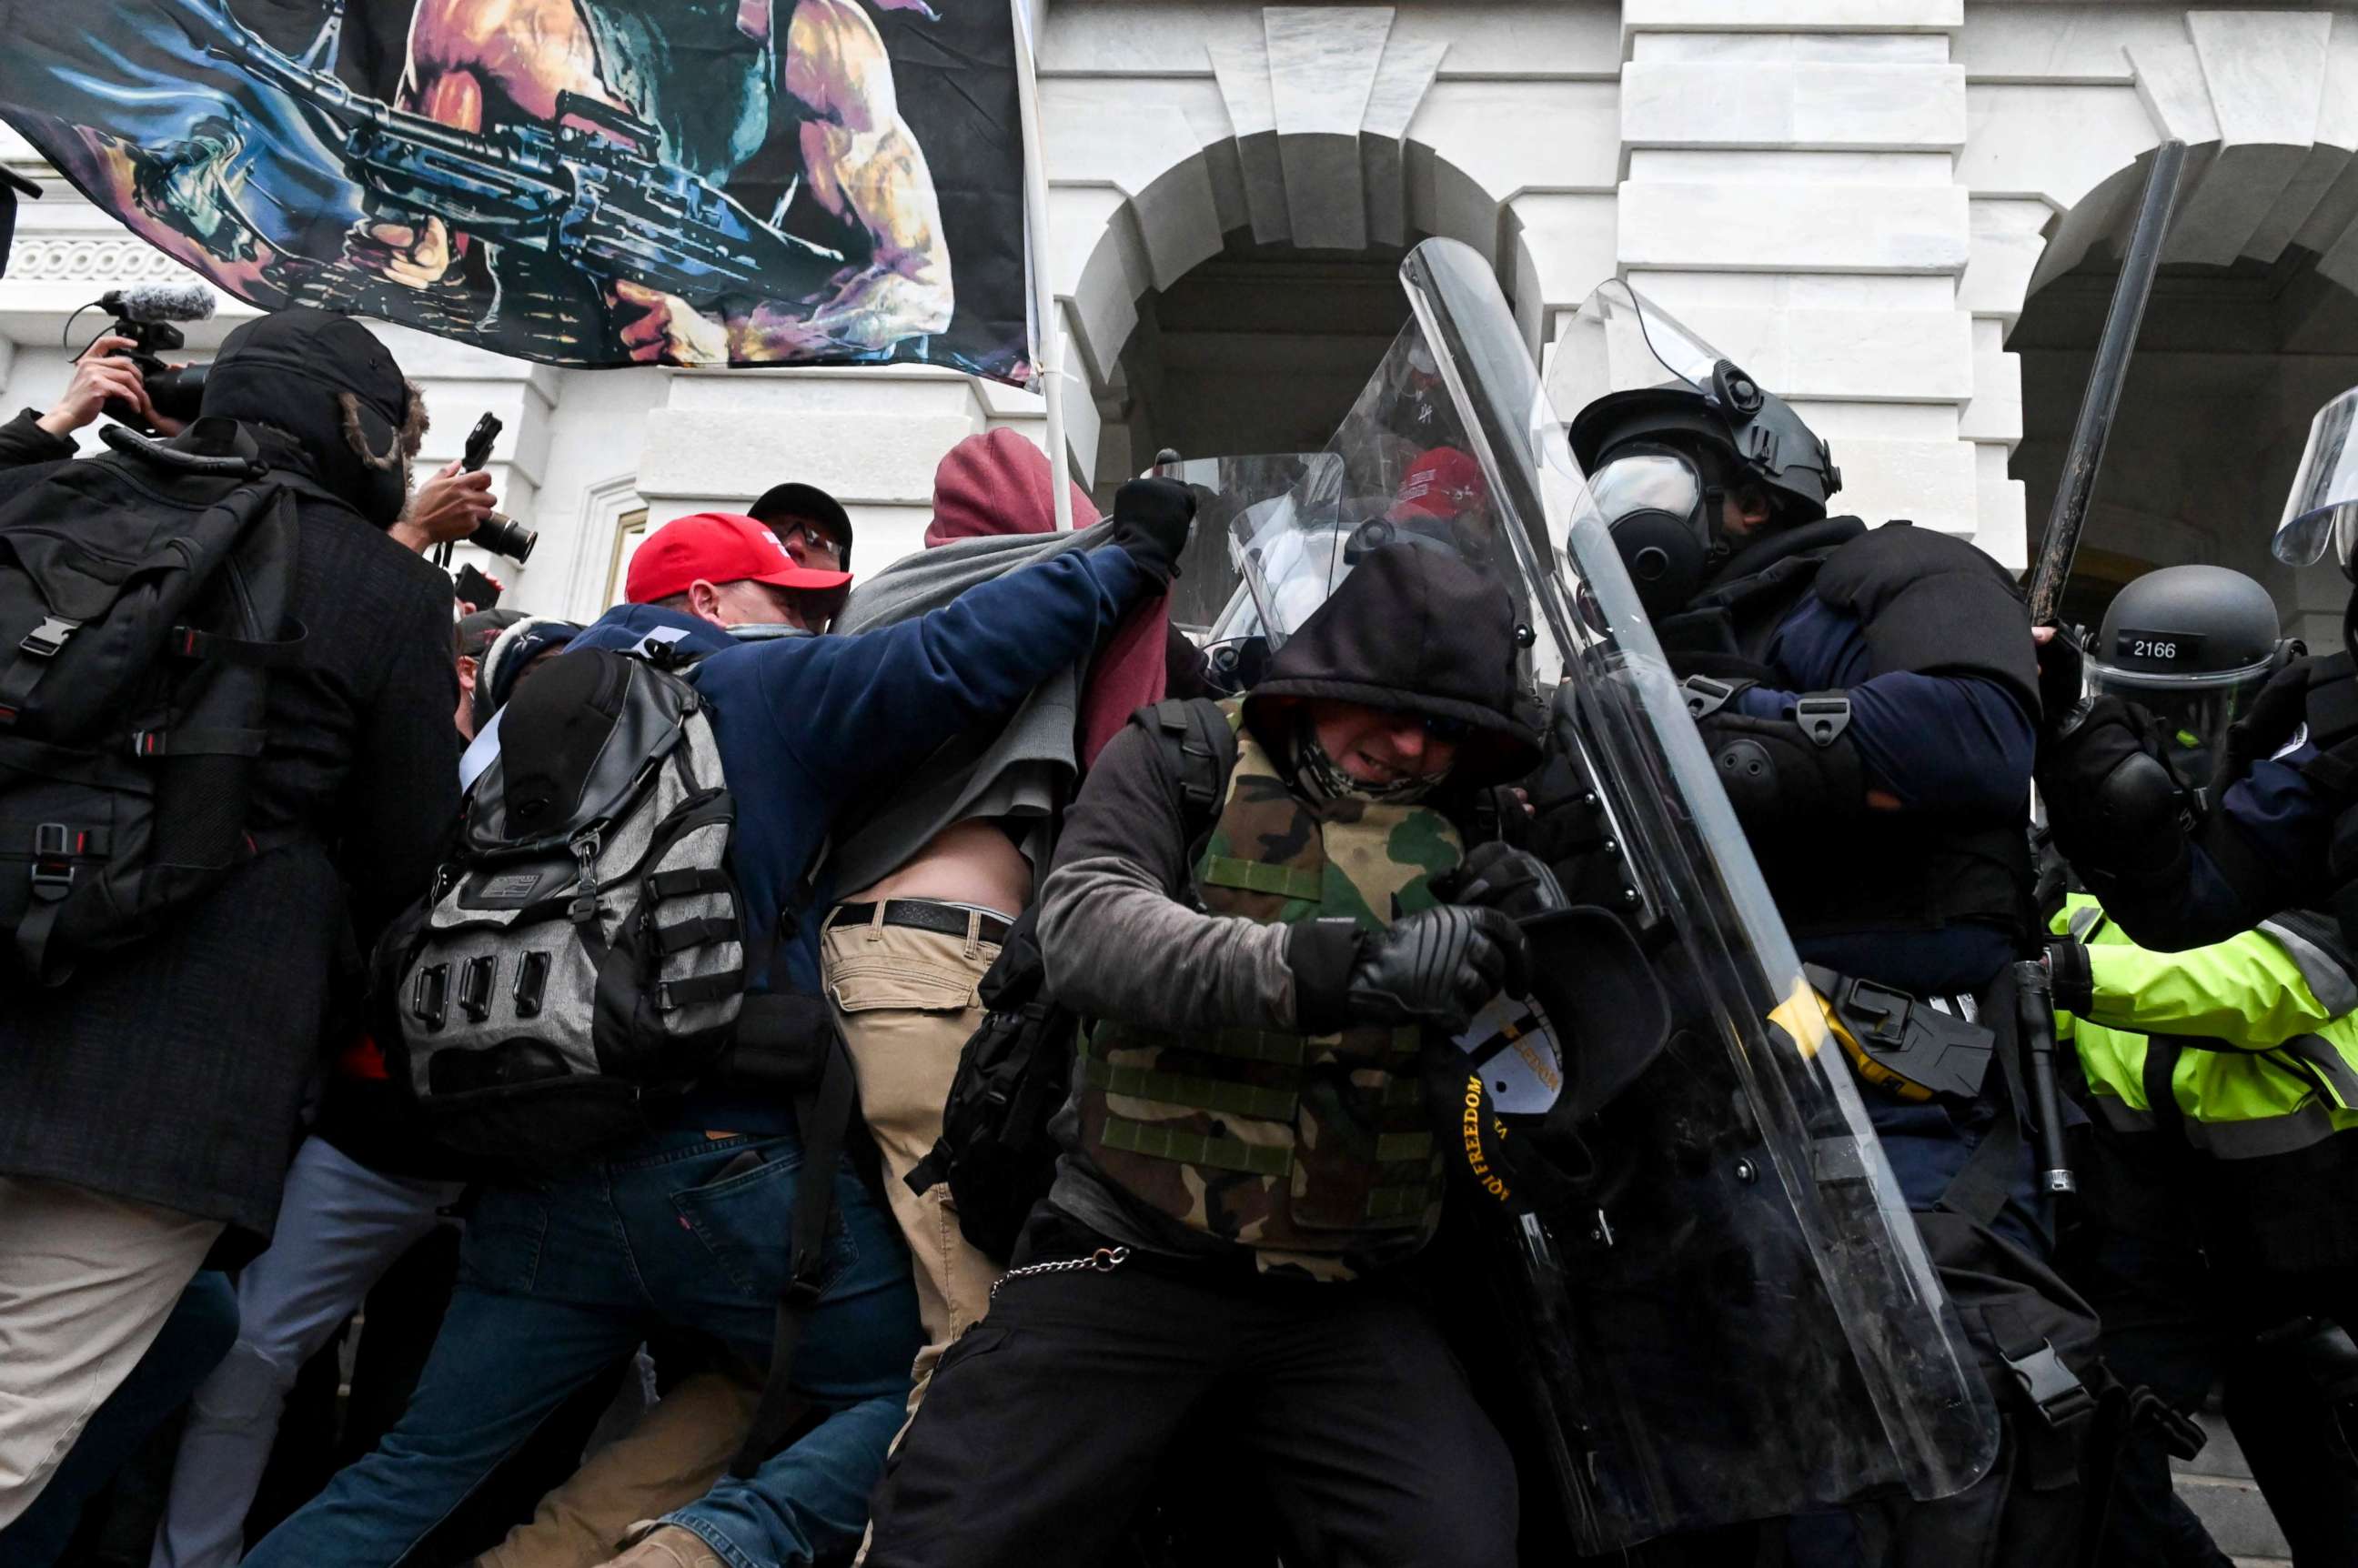 PHOTO: Riot police push back a crowd of supporters of US President Donald Trump after they stormed the Capitol building in Washington, D.C., Jan. 6, 2021.